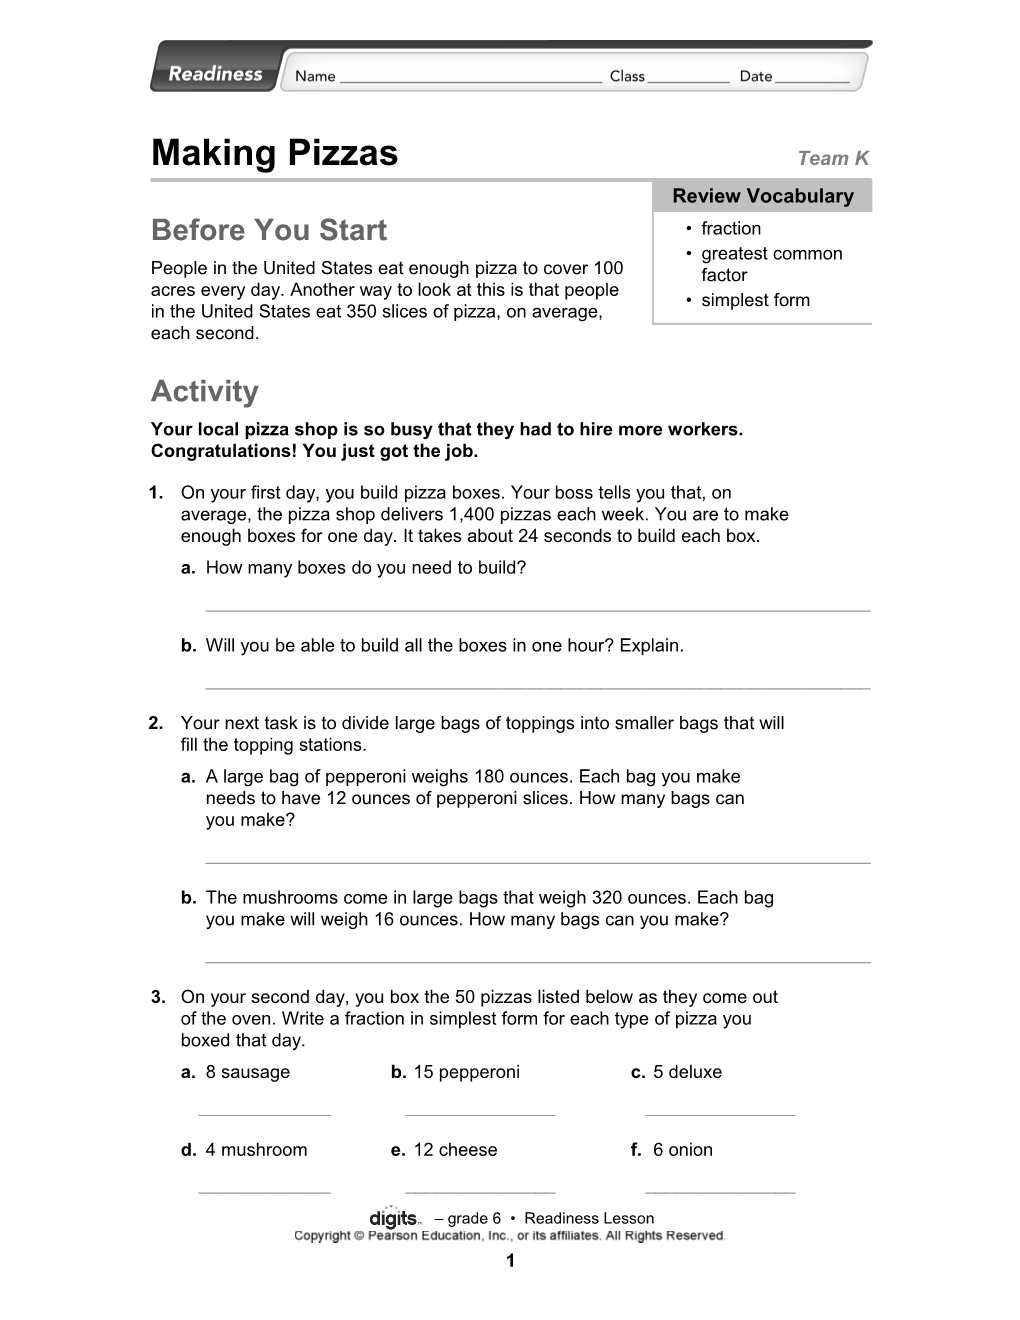 Making Pizzas (Continued)Team K